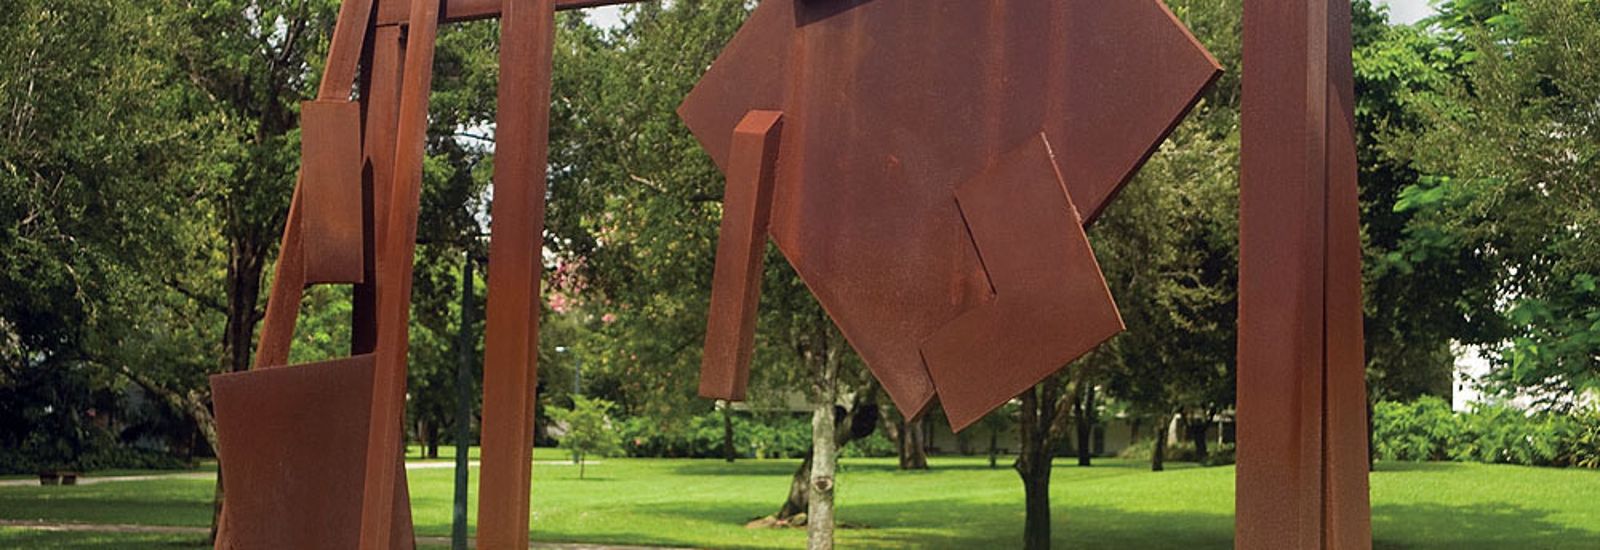 abstract large scale metal sculpture comprised of geometric shapes rust color